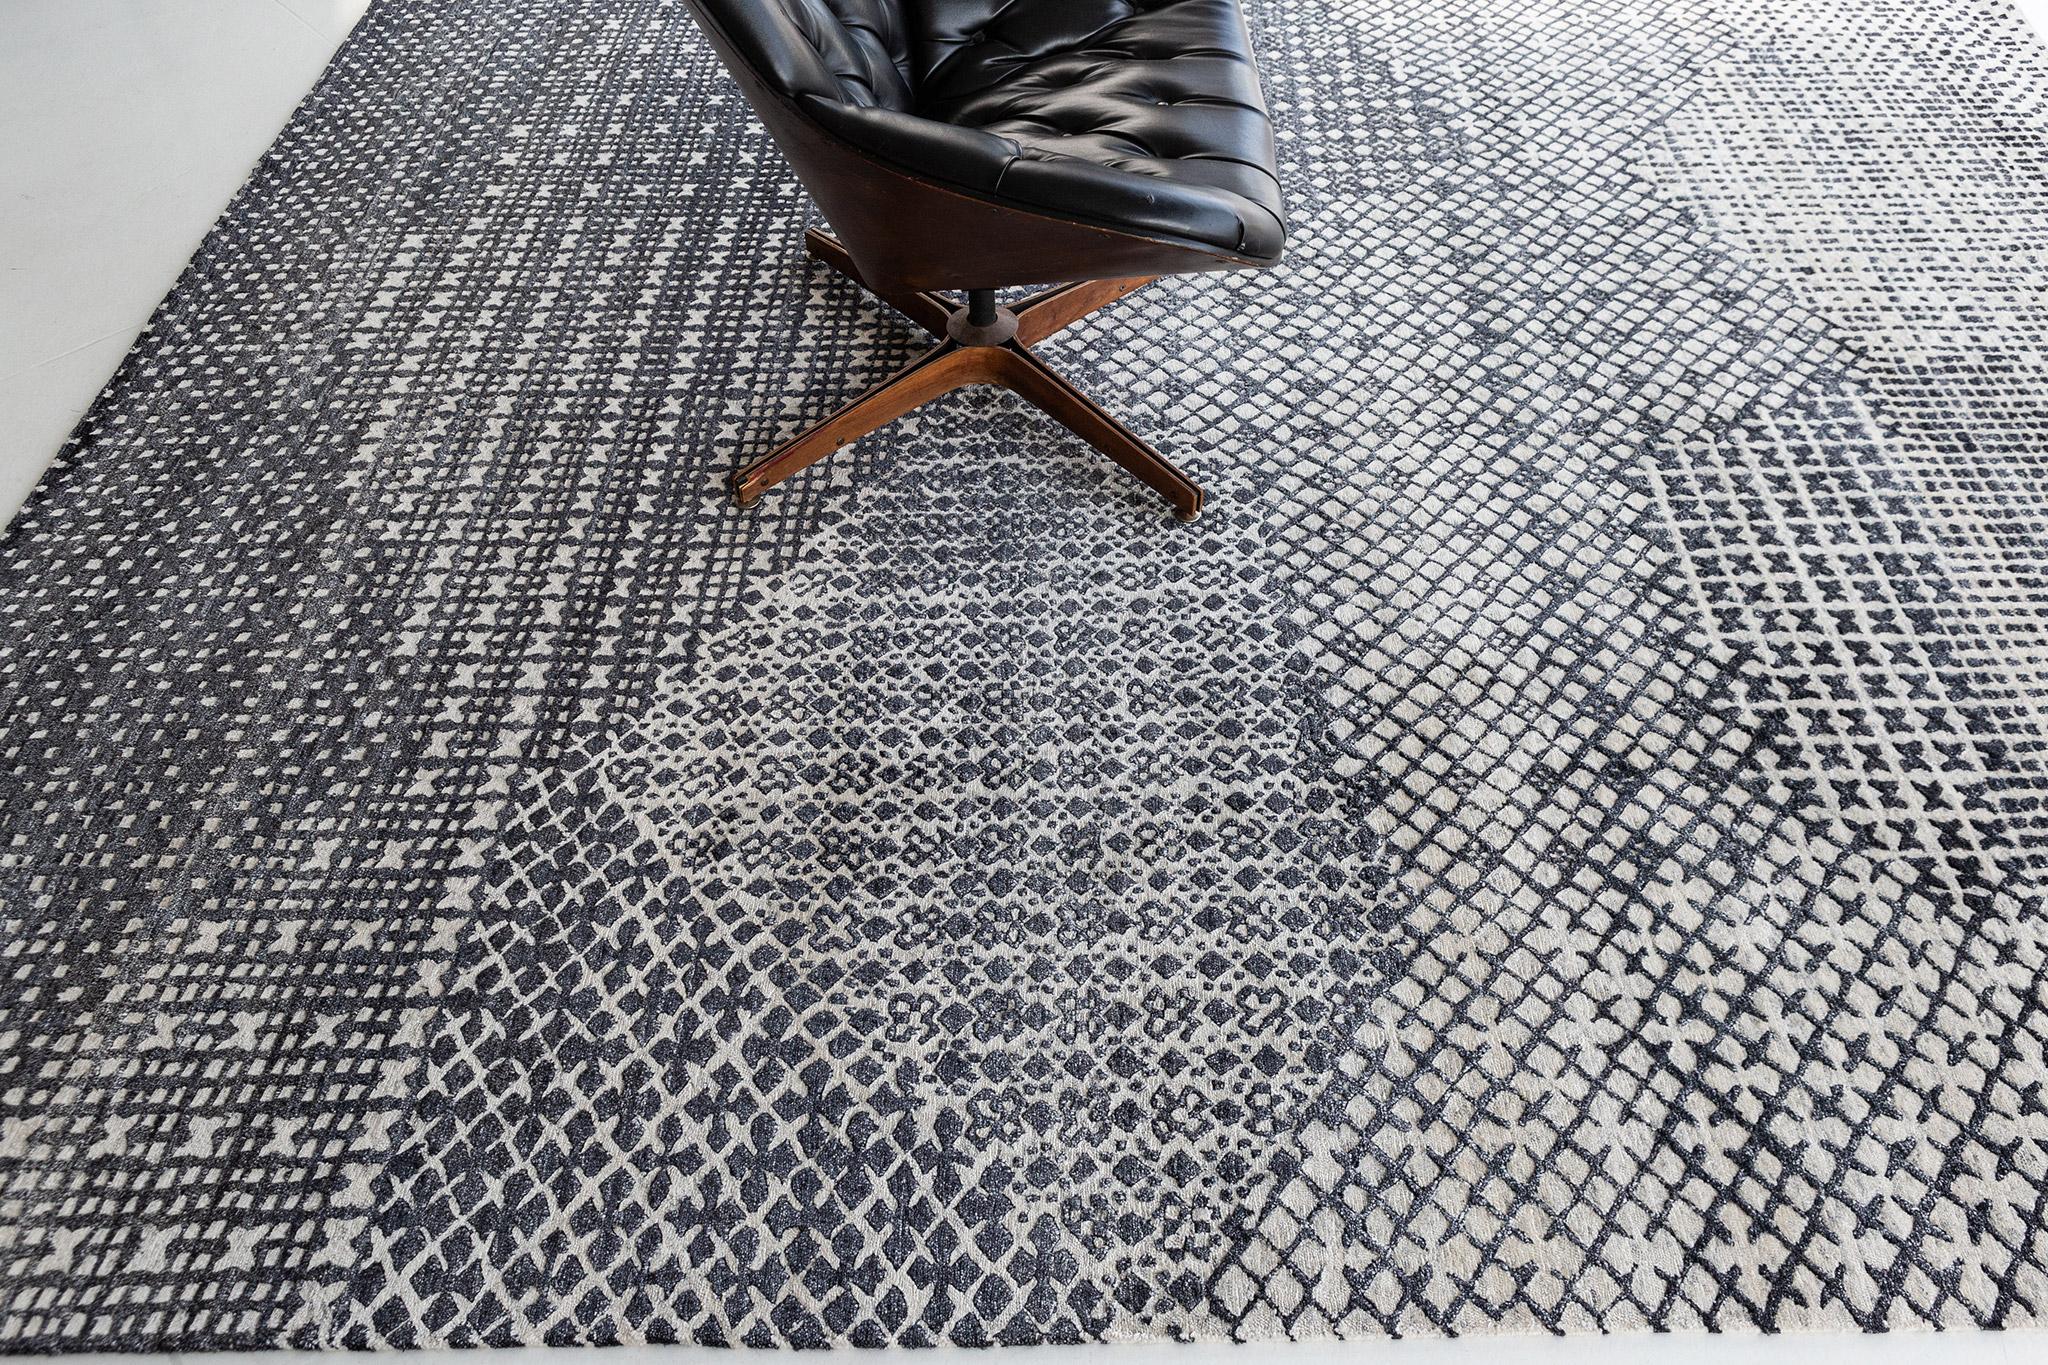 This magical Modern Design Bamboo Silk rug features the horizontal strokes, with its playful combination of charcoal and gray dominant colors. It is just as trendy and refined at the same time, perfect for any connoisseur of a fine lifestyle.

Rug